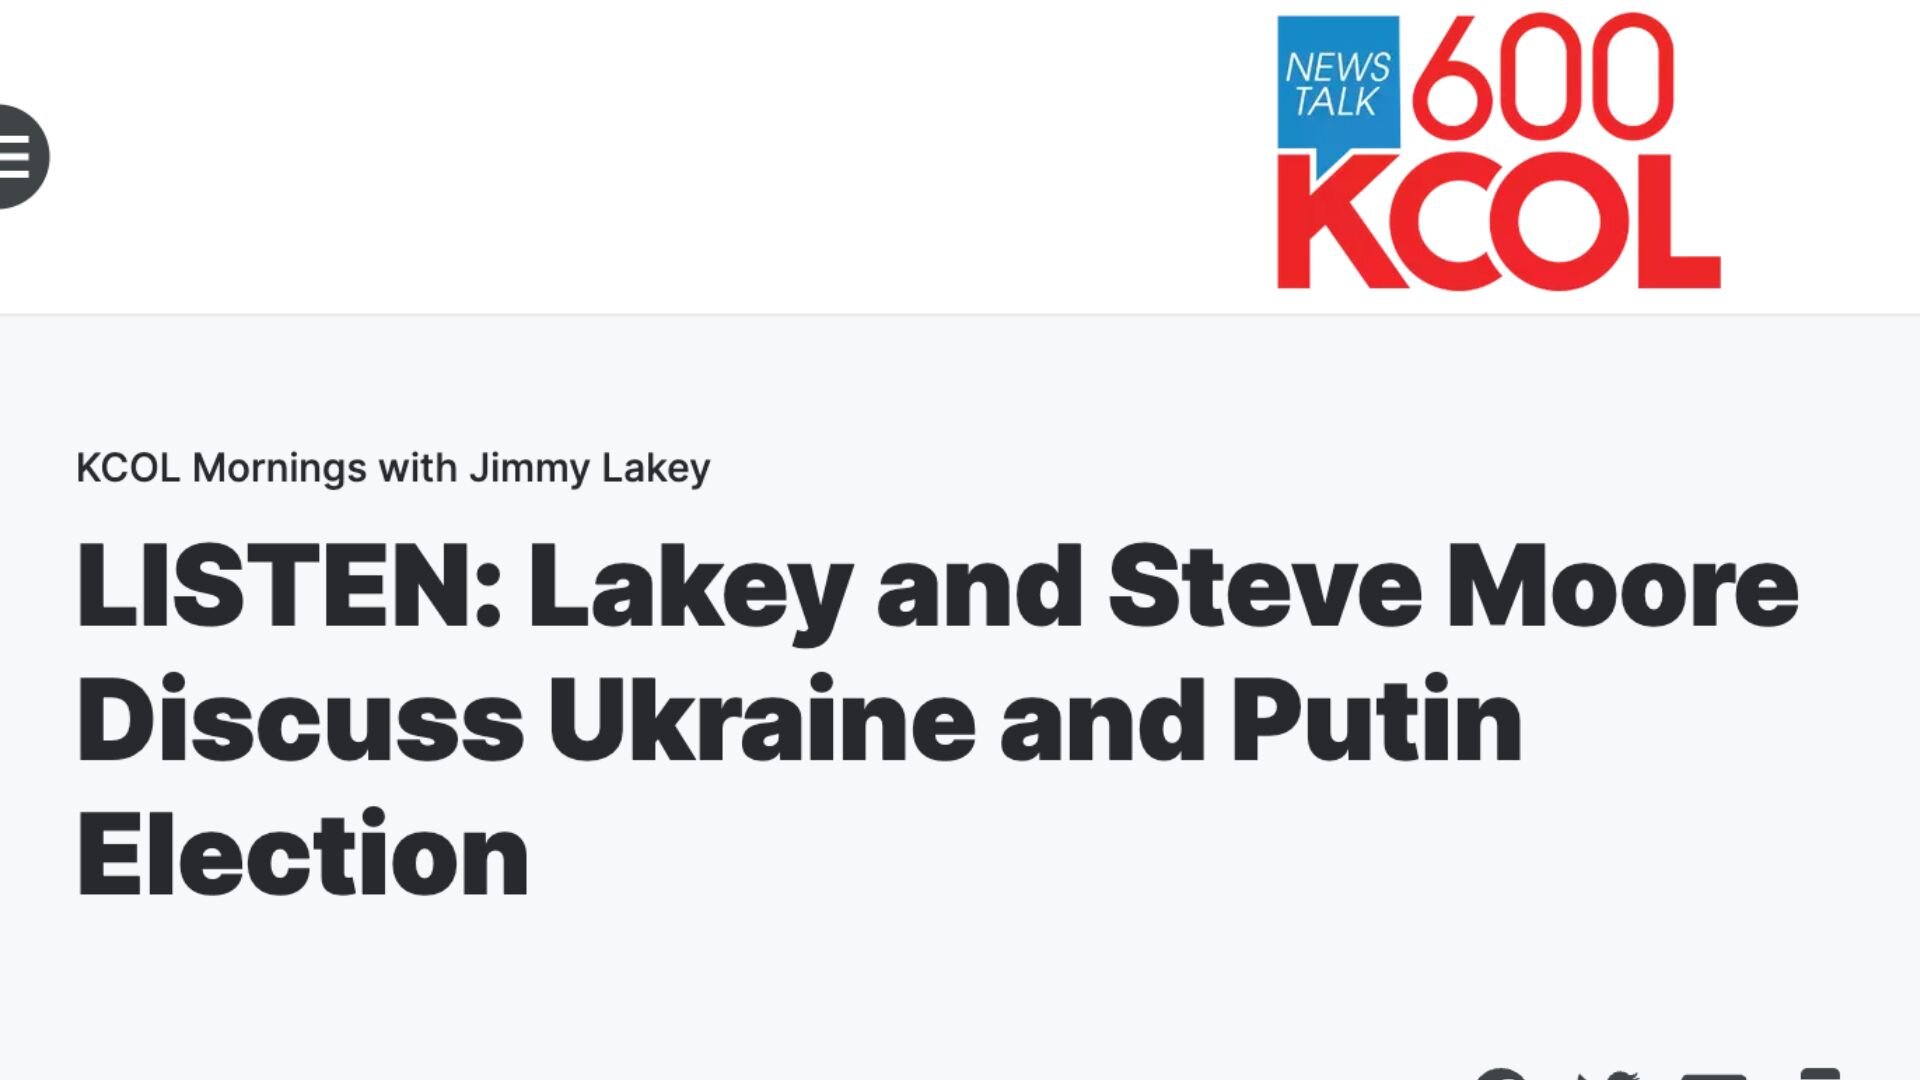 Lakey and Steven Moore Discuss Ukraine and Putin Election